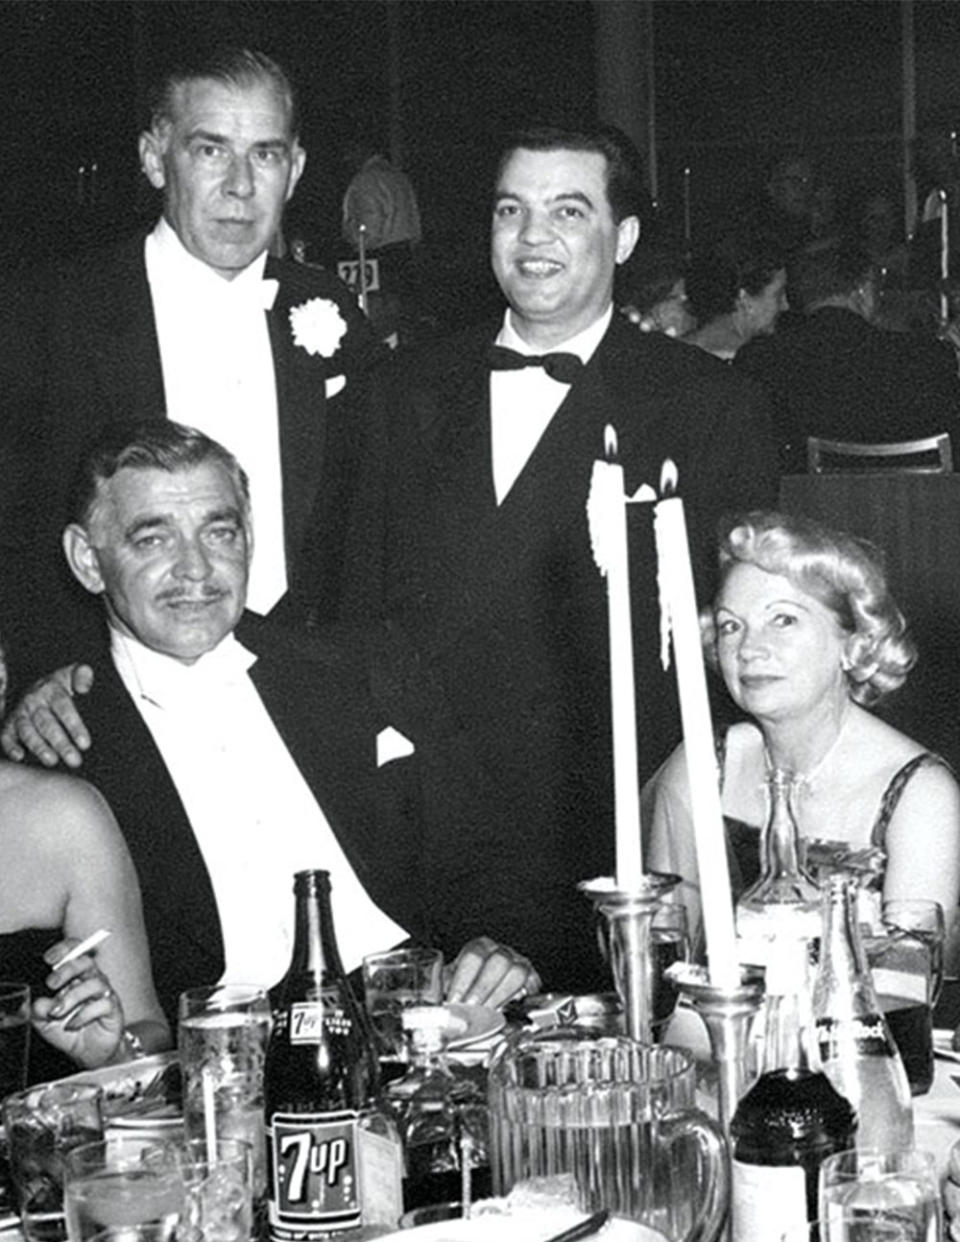 At the first Governors Ball in 1958, Clark Gable sat back as he was joined by from left screenwriter/director and Academy president George Seaton, Venice Film Festival director Floris Luigi Ammannati and singer Bobbe Brox.